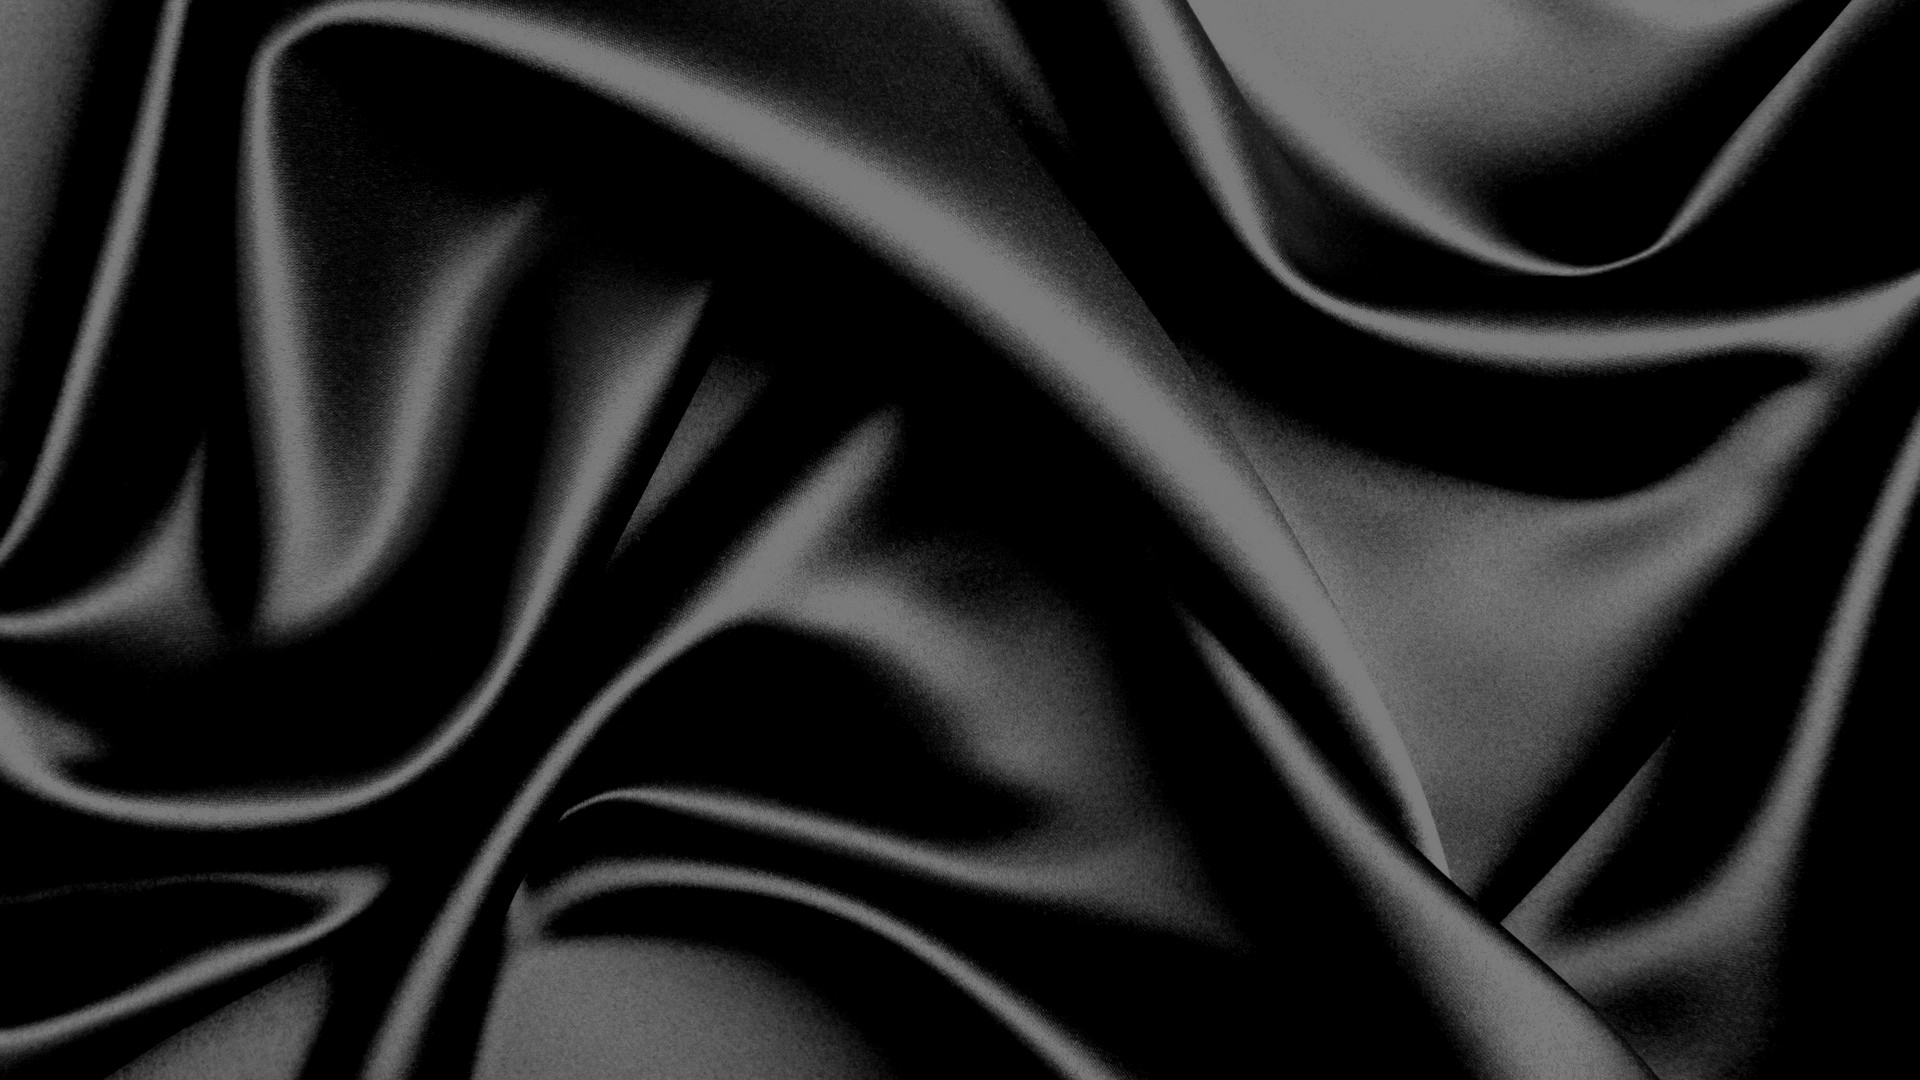 HD Wallpaper Black Silk with high-resolution 1920x1080 pixel. You can use this wallpaper for your Desktop Computer Backgrounds, Mac Wallpapers, Android Lock screen or iPhone Screensavers and another smartphone device